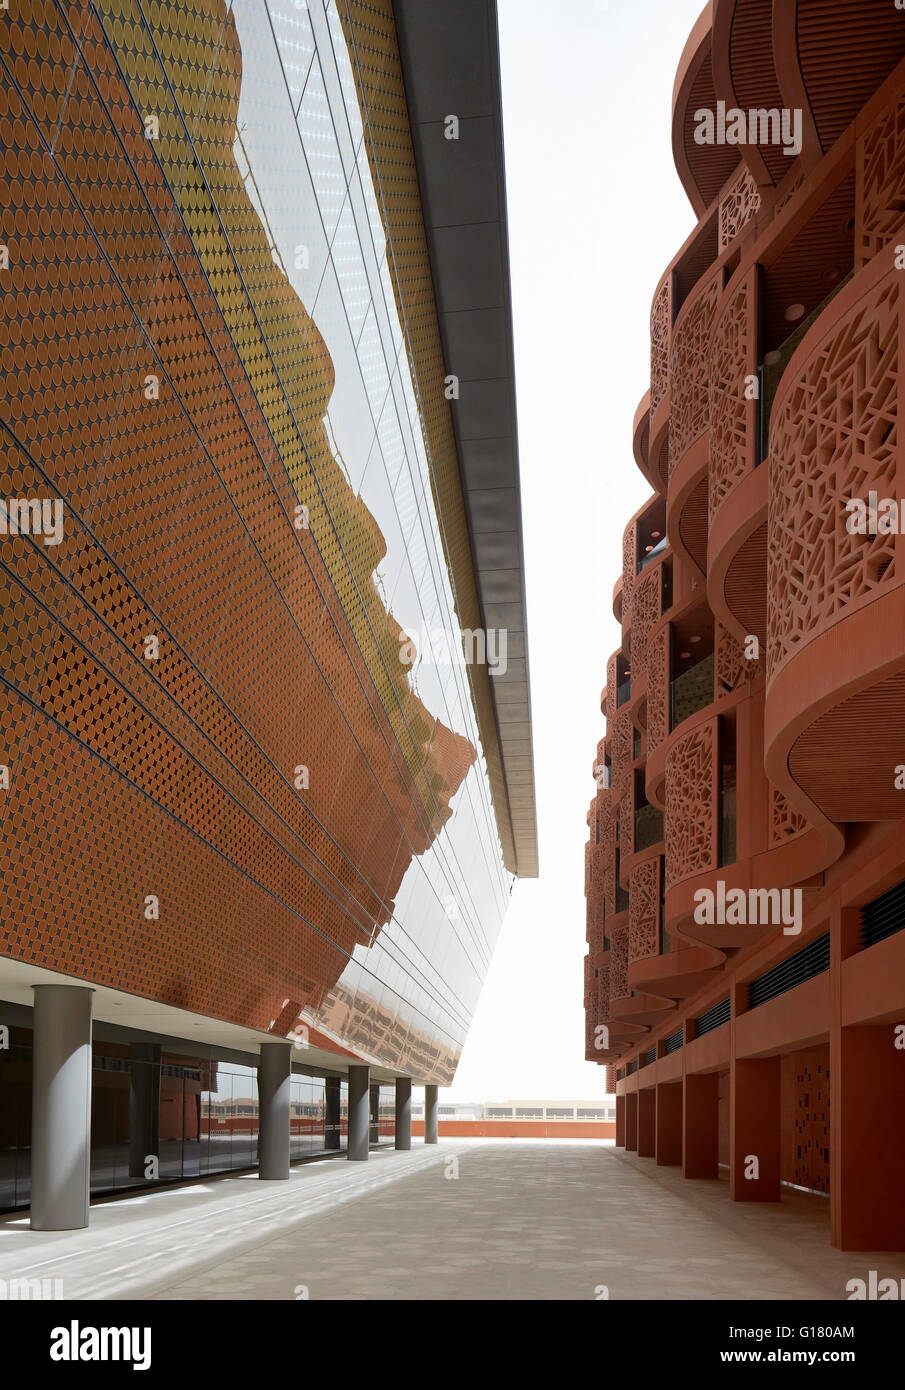 Perspective of terracotta and ceramic fritted glass facade. Masdar City, Masdar City, United Arab Emirates. Architect: various, Stock Photo